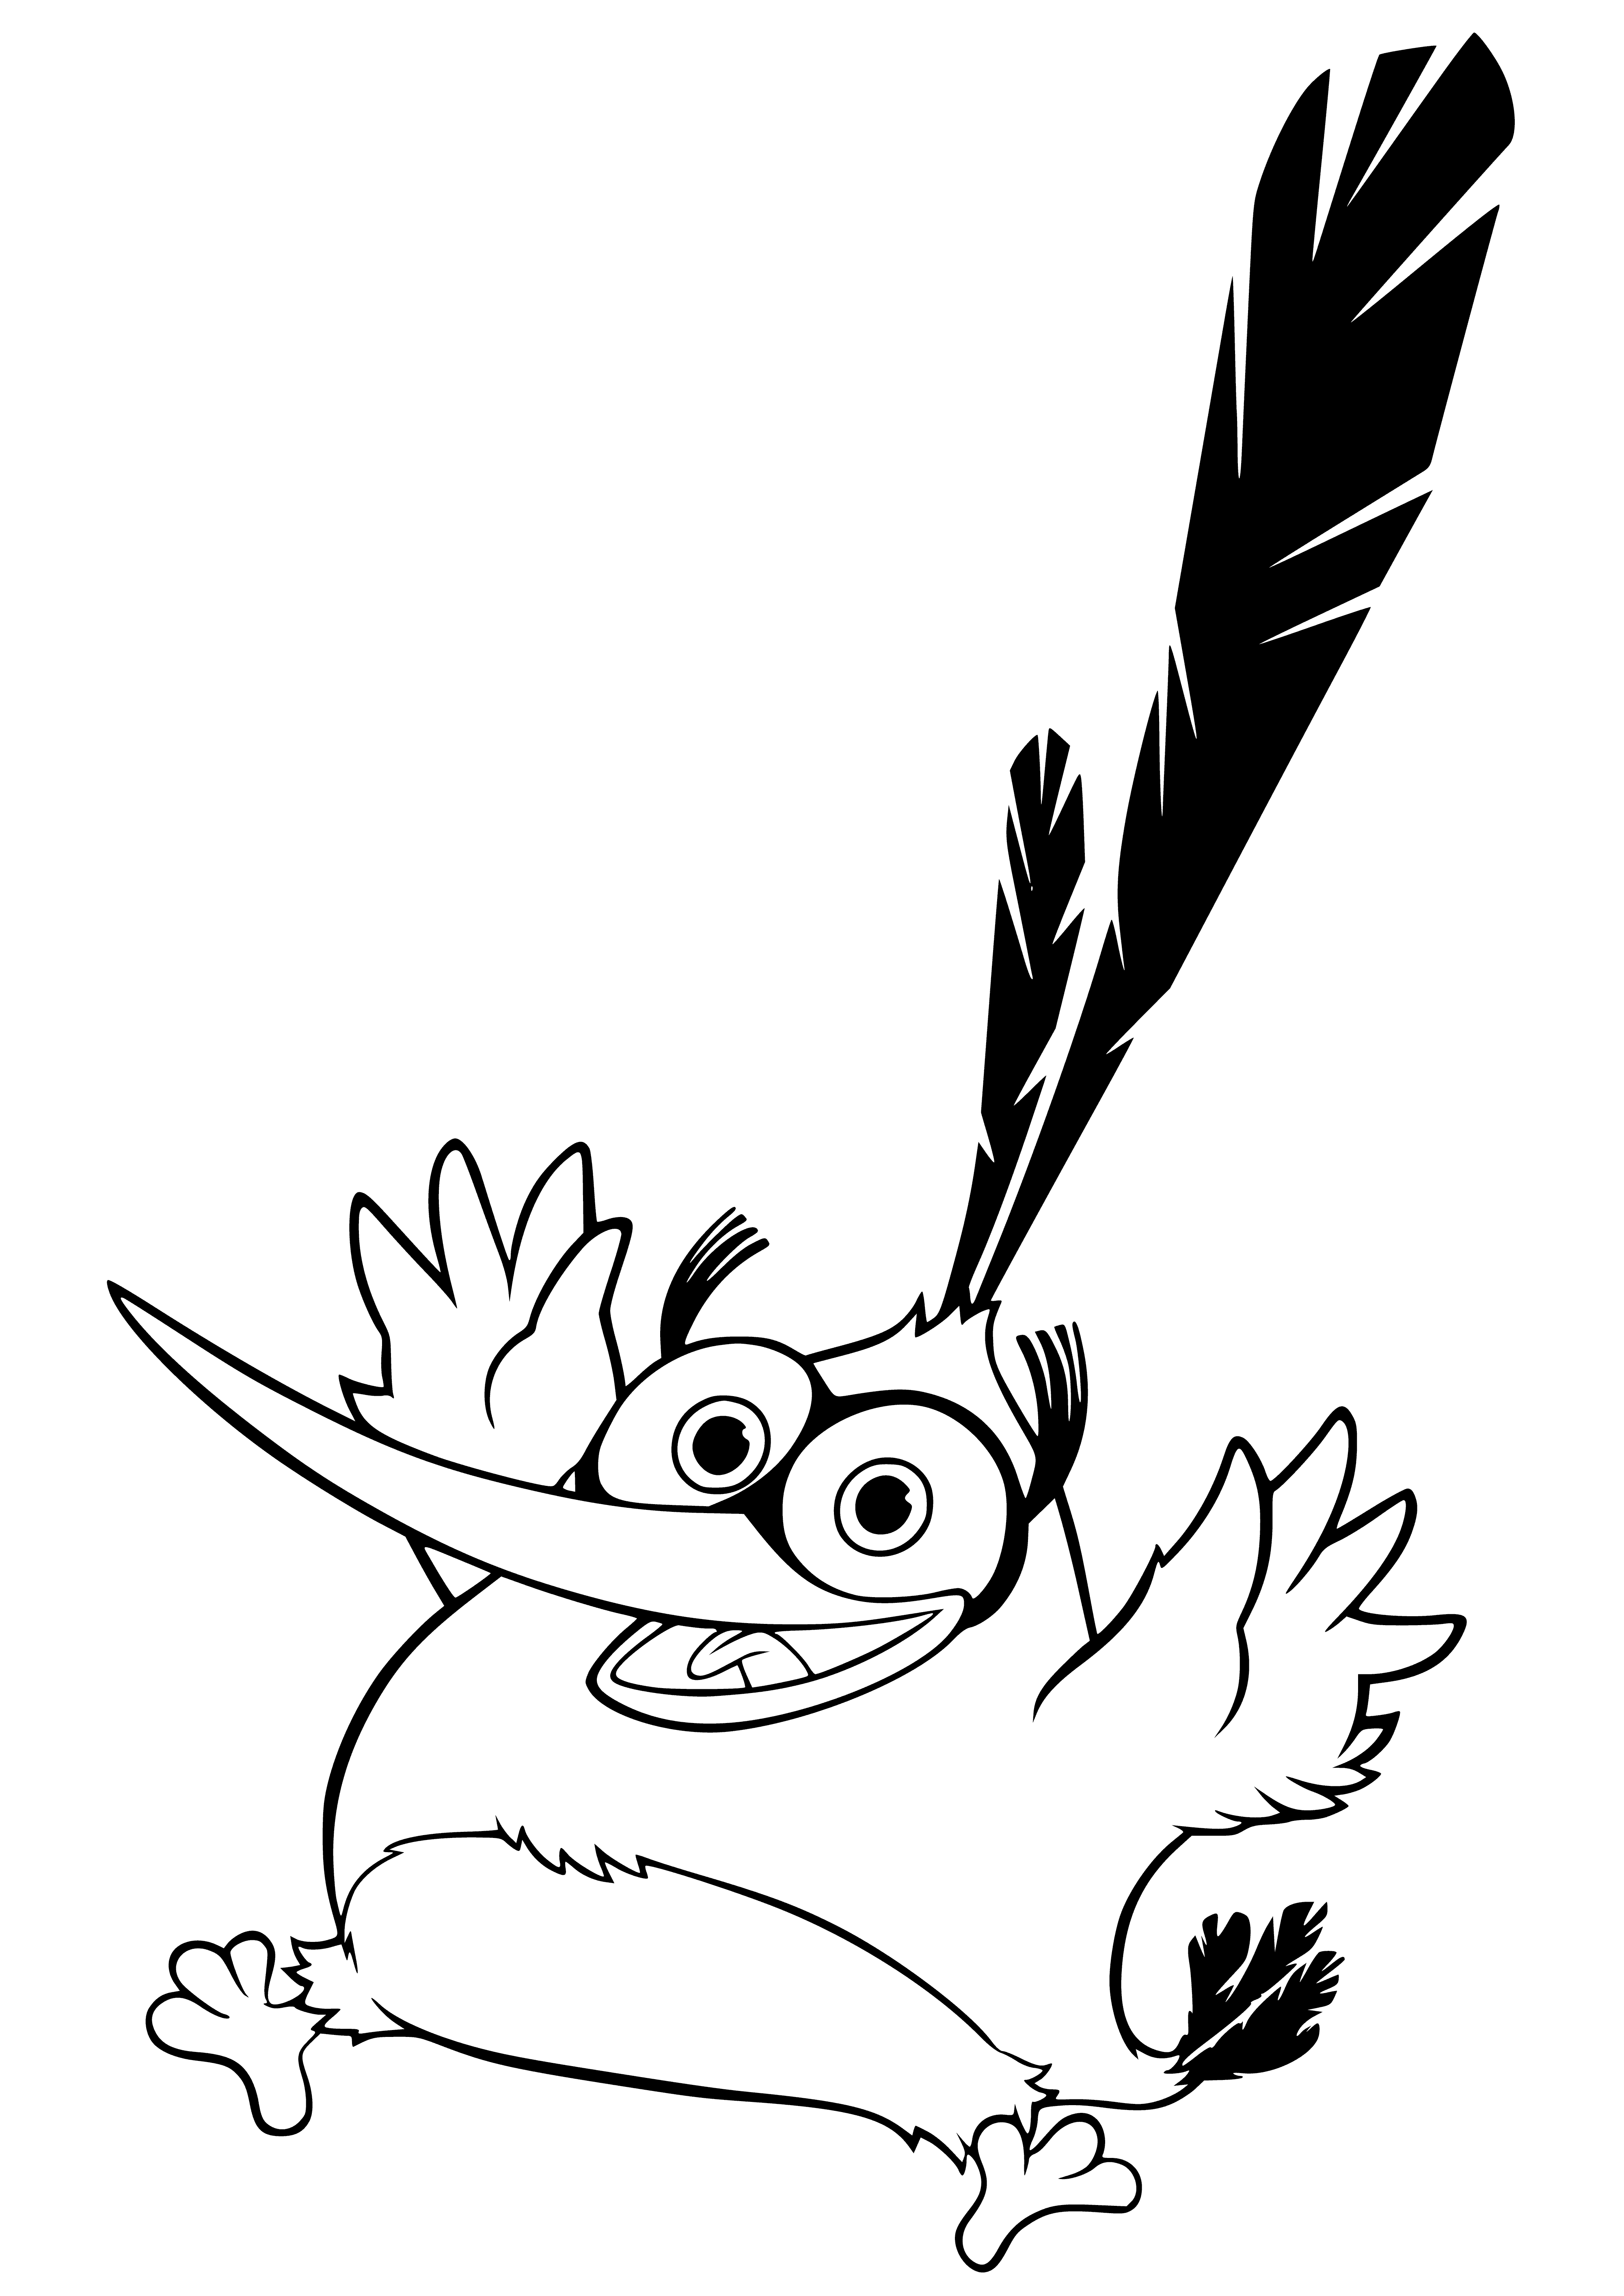 coloring page: Angry birds playing on seesaw! Blue sky flying, green on seesaw, red on ground.